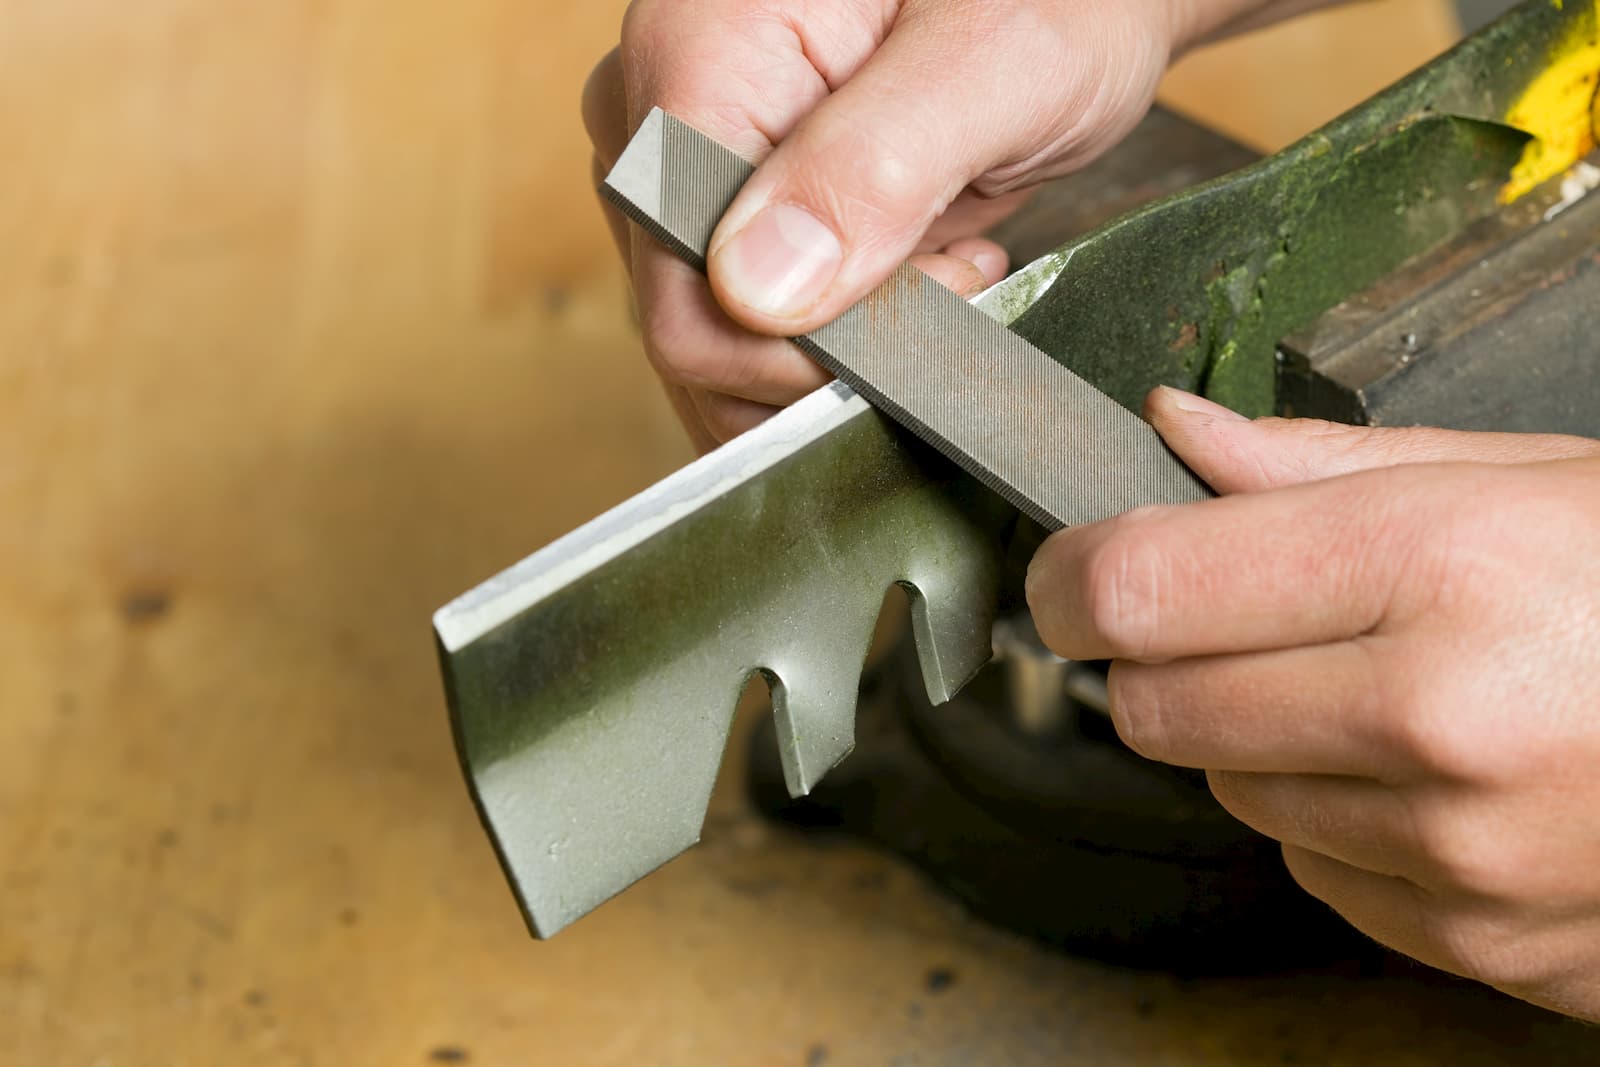 How to Sharpen the Lawn Mower Blade? 